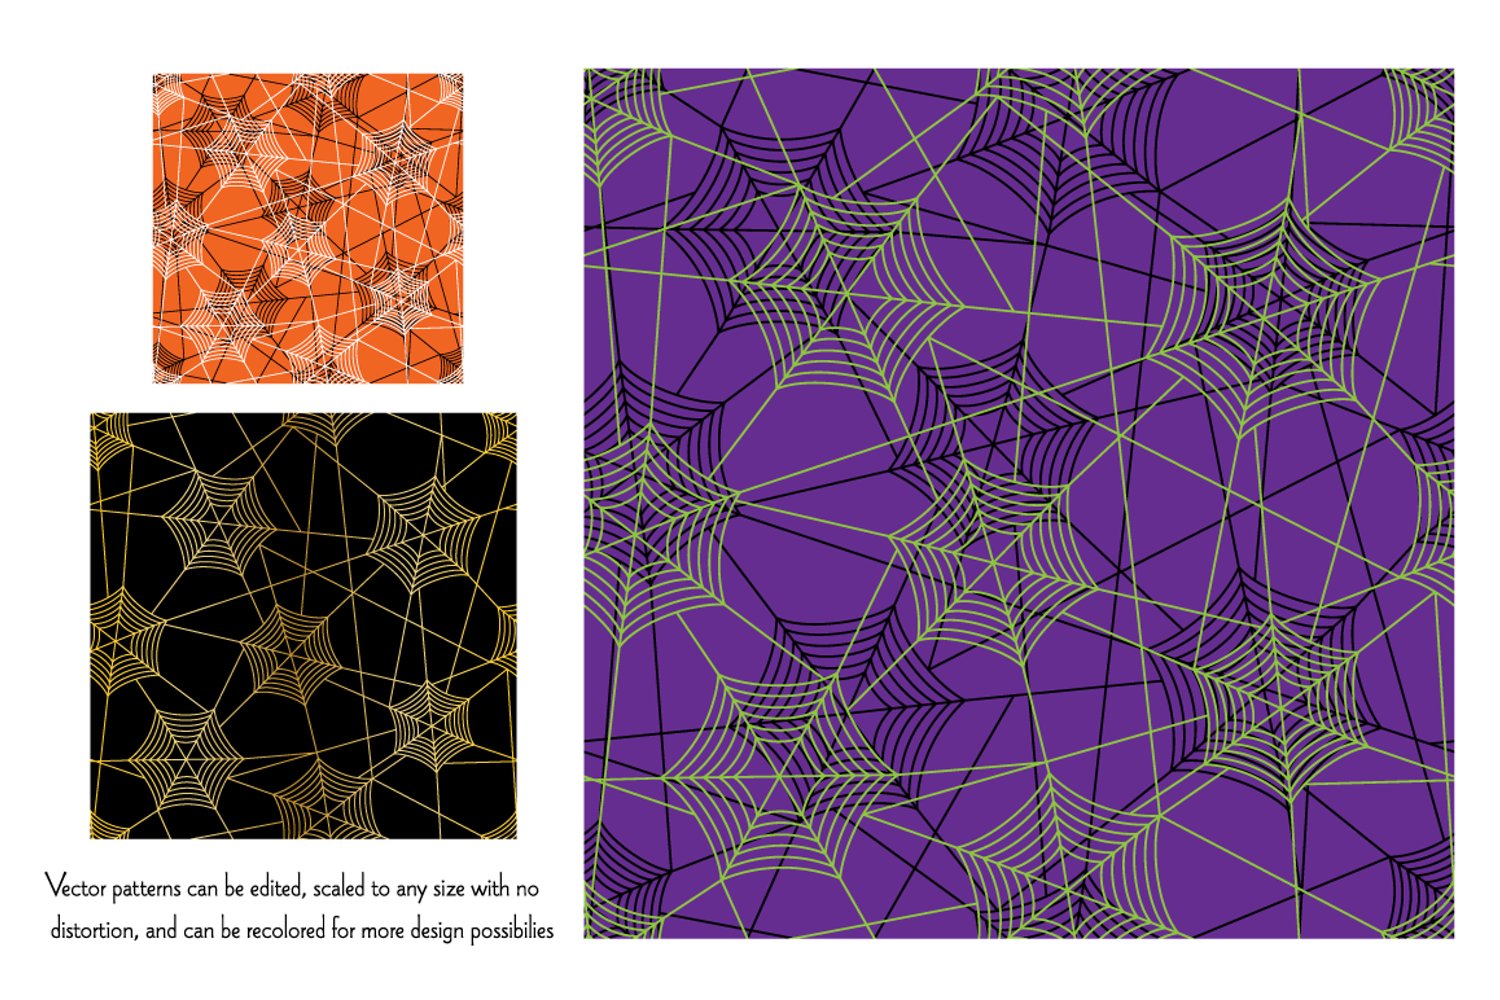 Vector patterns can be scaled to any size with no distortion.